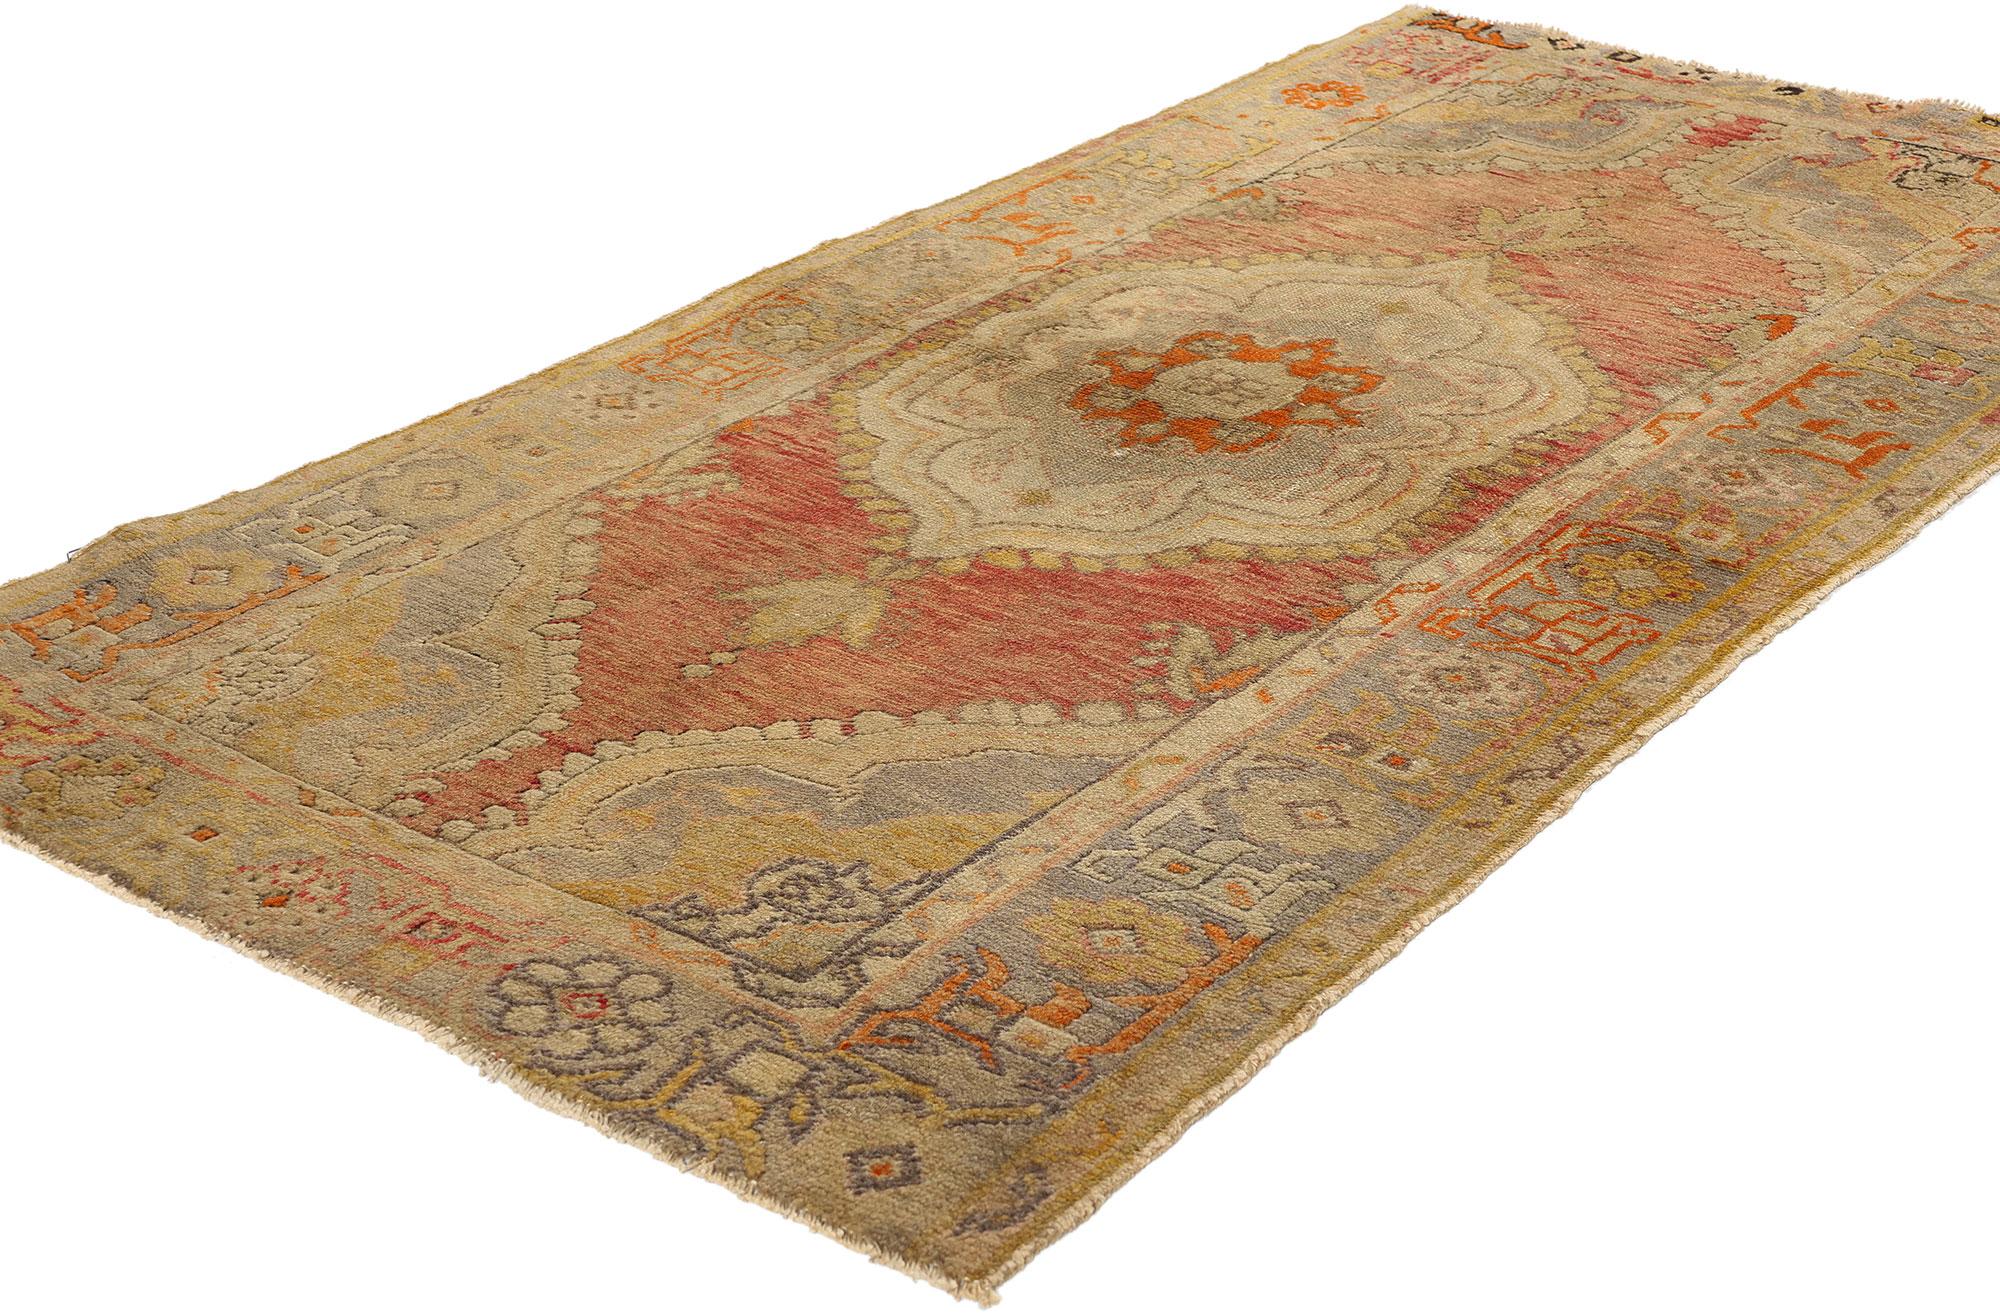 51084 Vintage Turkish Oushak Rug, 02'11 x 05'07. Emerging from the Western region of Oushak in Turkey, Turkish Oushak rugs are renowned for their elaborate designs, serene color schemes, and sumptuous wool materials. With roots tracing back to the